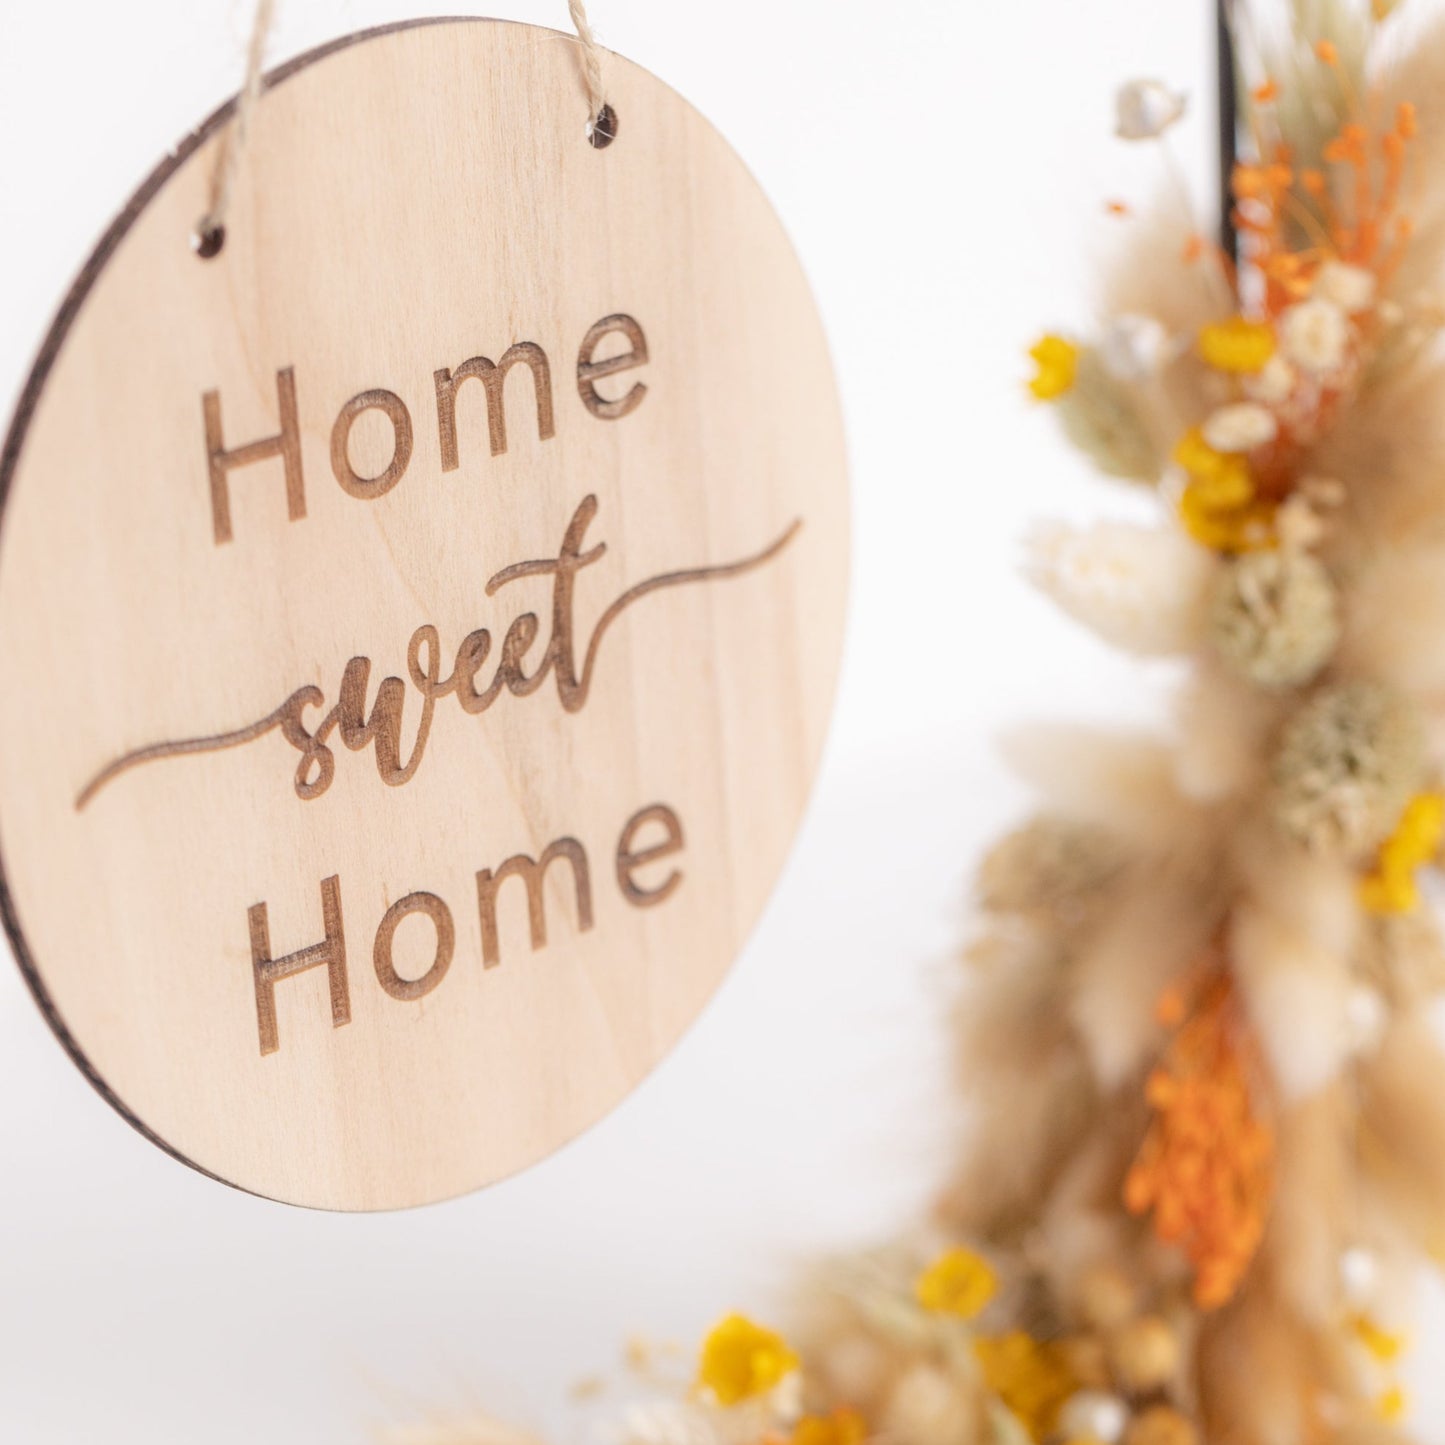 HOME sweet HOME floral cube